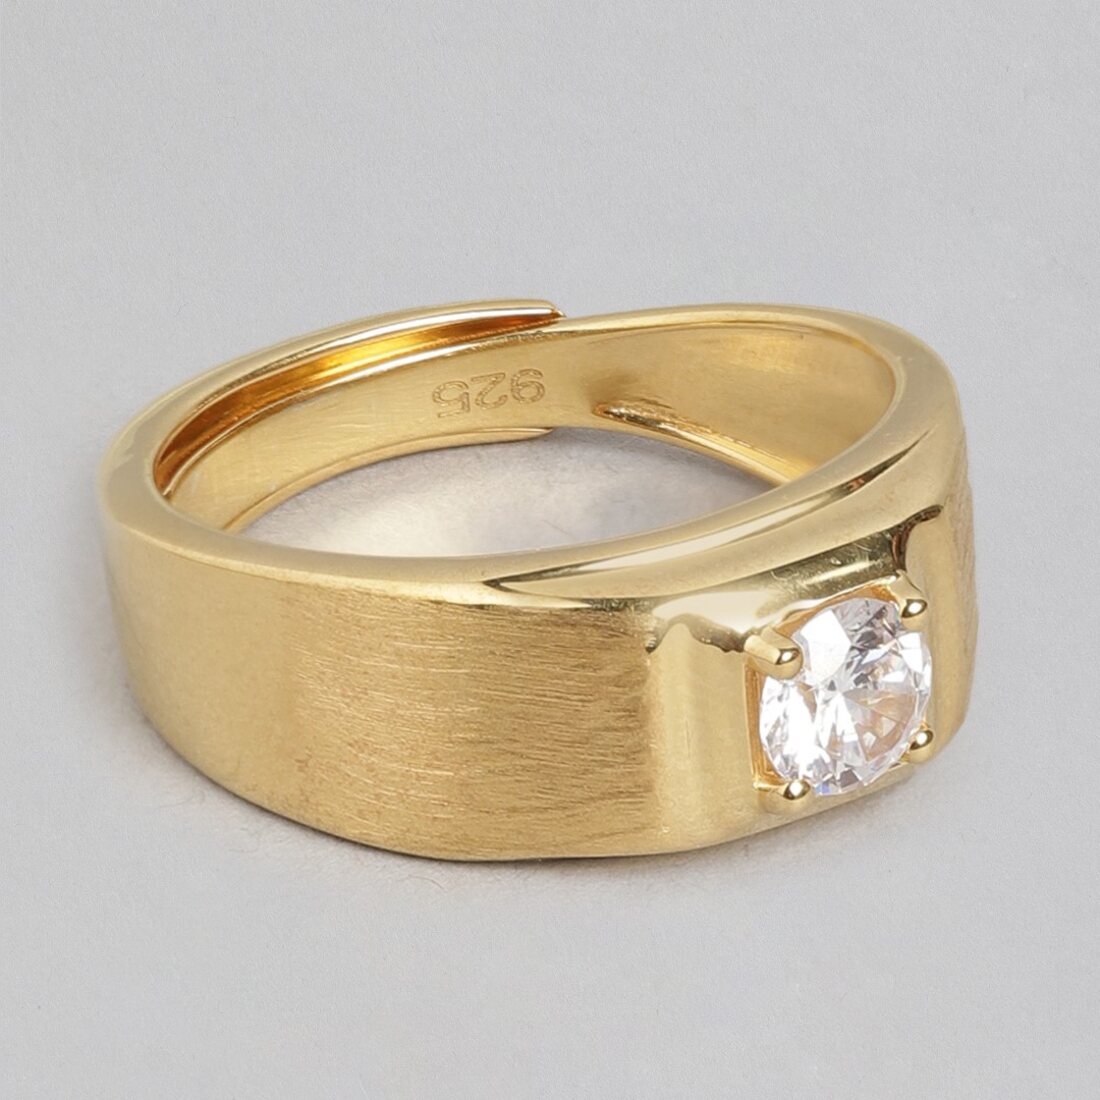 Radiant Gold Glow 925 Sterling Silver Ring with Cubic Zirconia for Him